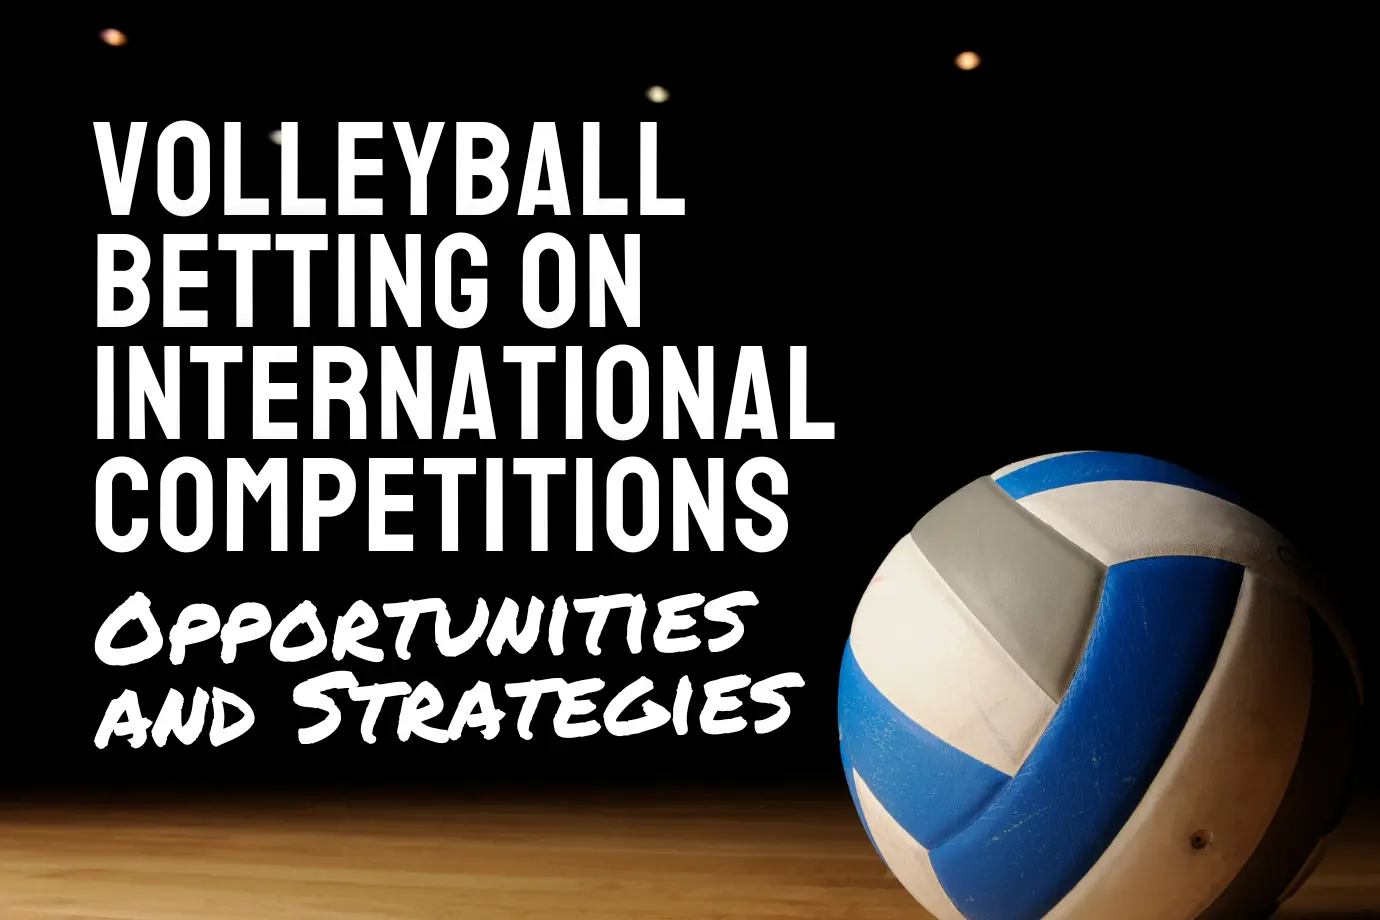 Volleyball Betting on International Competitions: Opportunities and Strategies